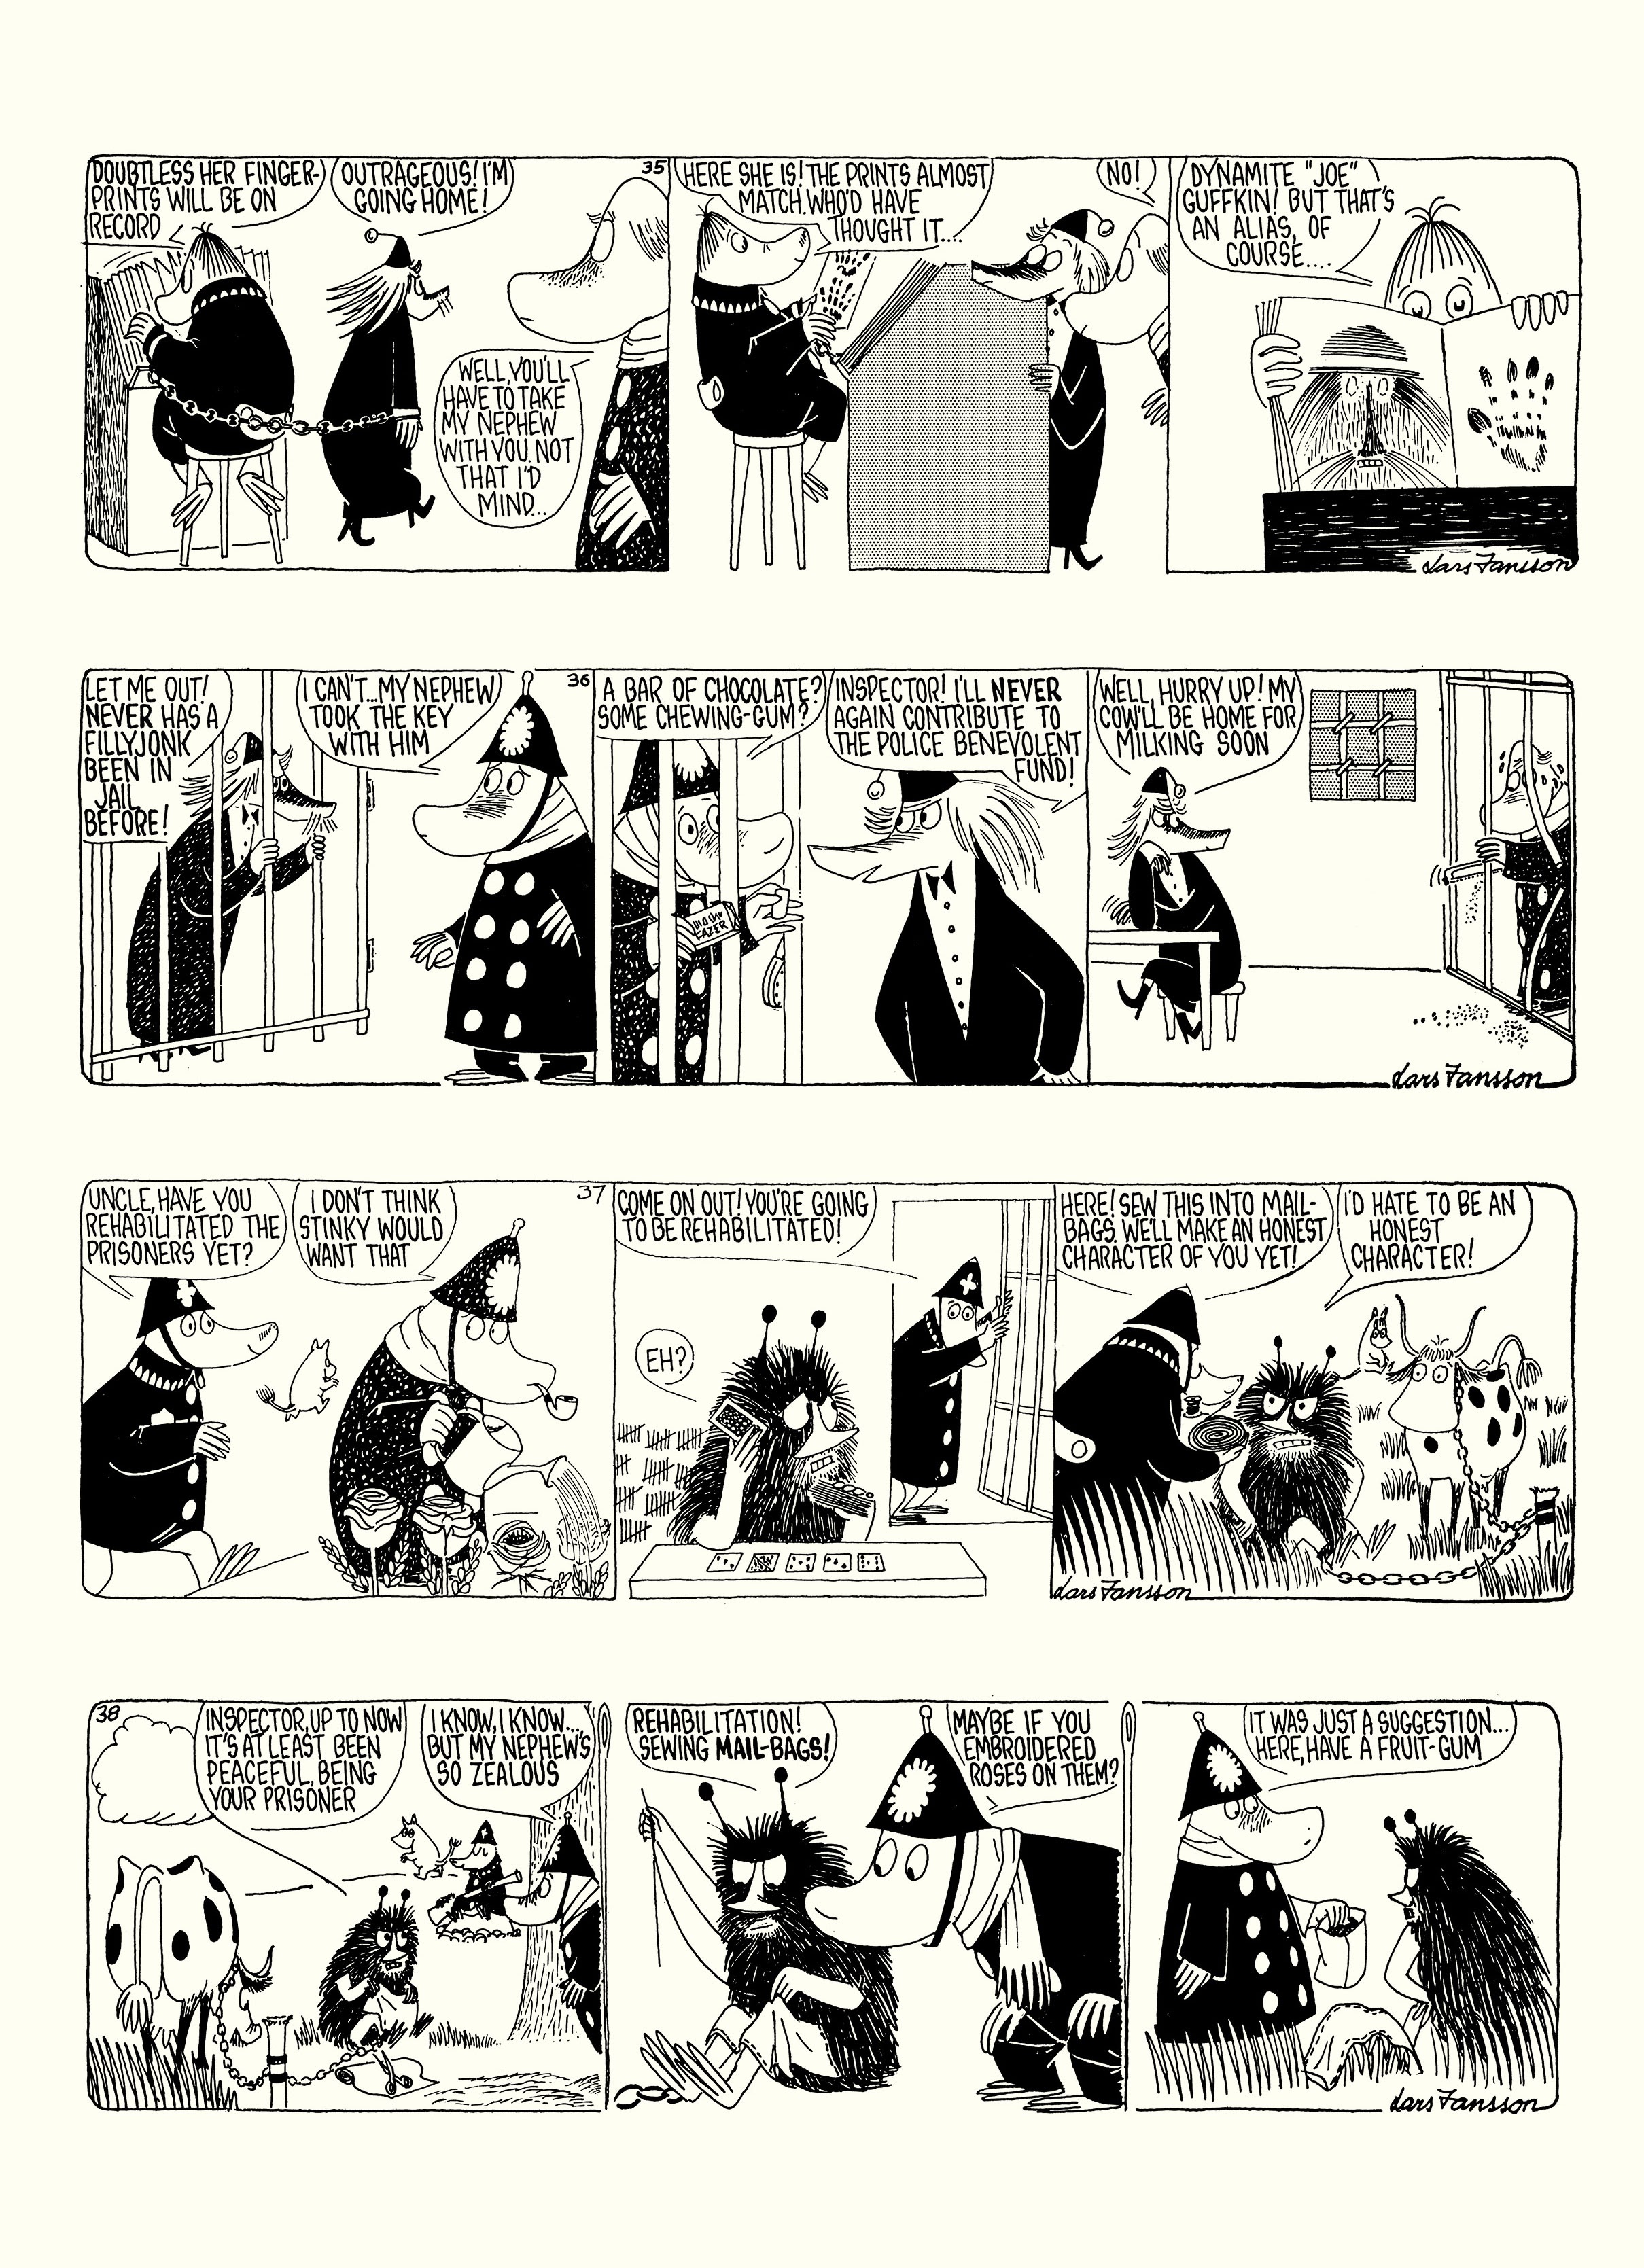 Read online Moomin: The Complete Lars Jansson Comic Strip comic -  Issue # TPB 8 - 80